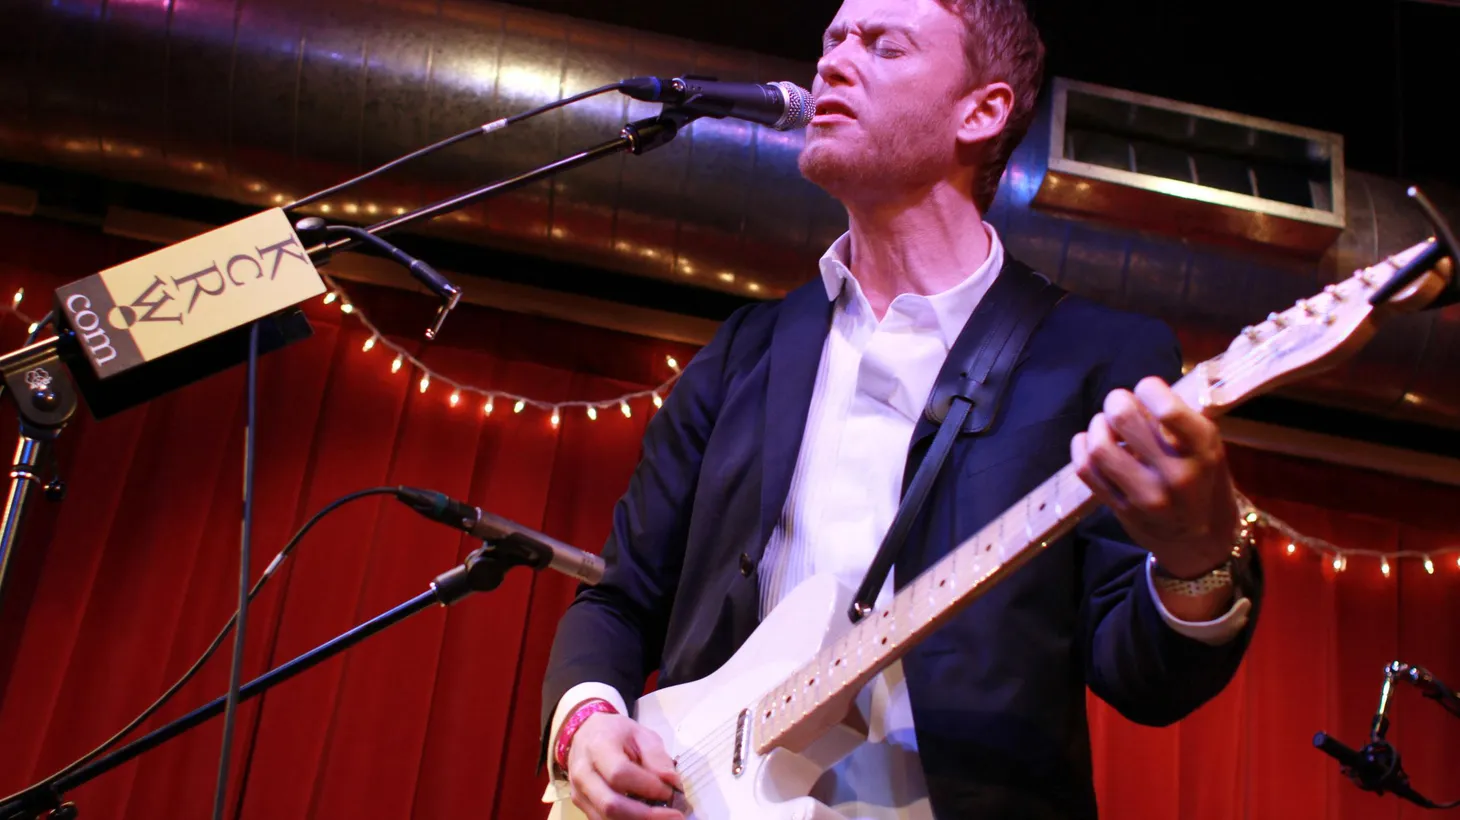 Teddy Thompson's musical pedigree gets your attention immediately, as the son of folk legends Richard and Linda Thompson, but it's his soaring voice that won our hearts at KCRW's Apogee Sessions.